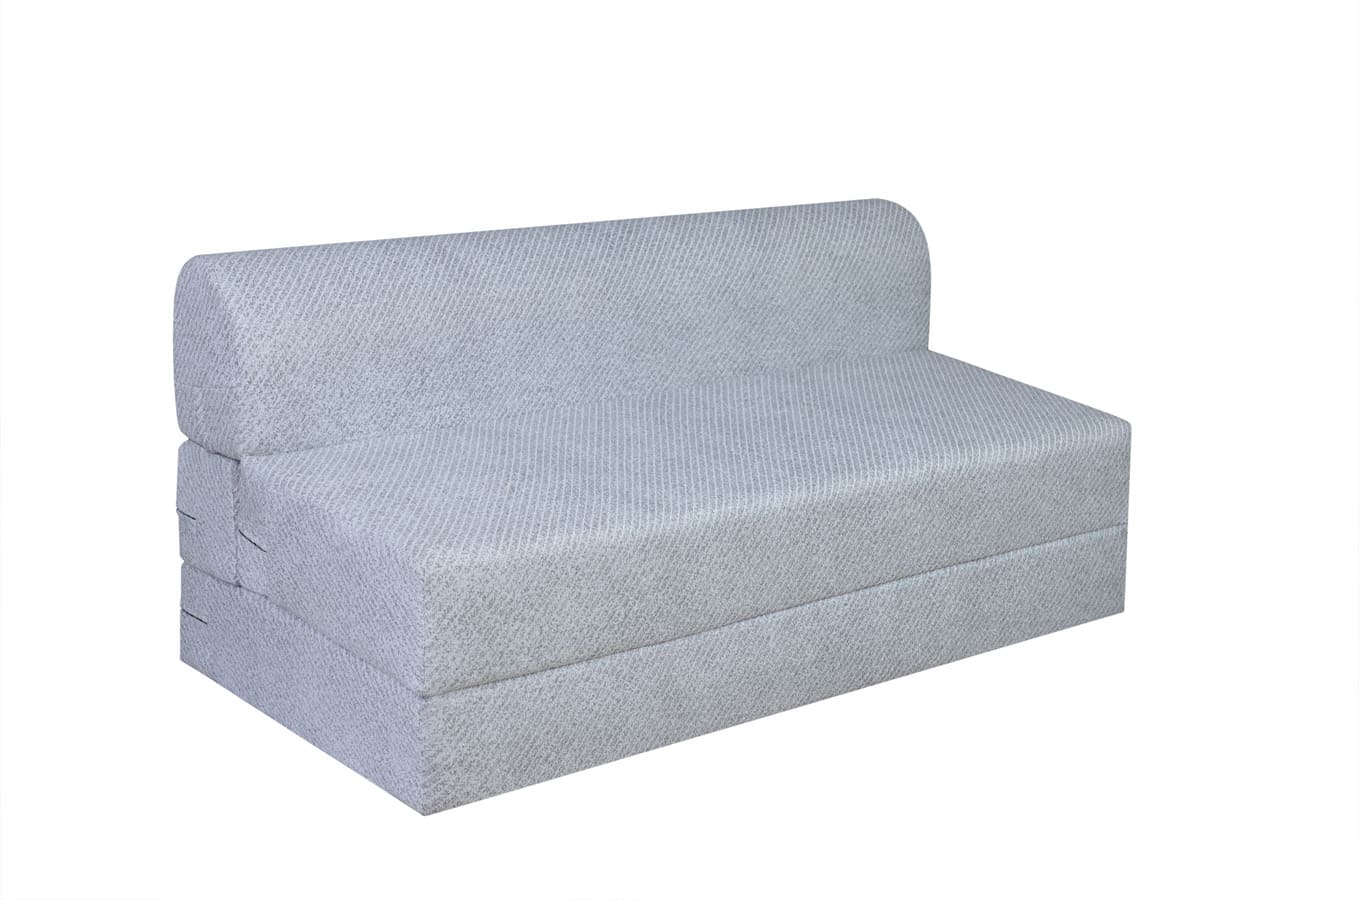 Bindal Sofa Cume Bed Double Size 4X6.5 Feet 48X78 Thickness 8 Inch